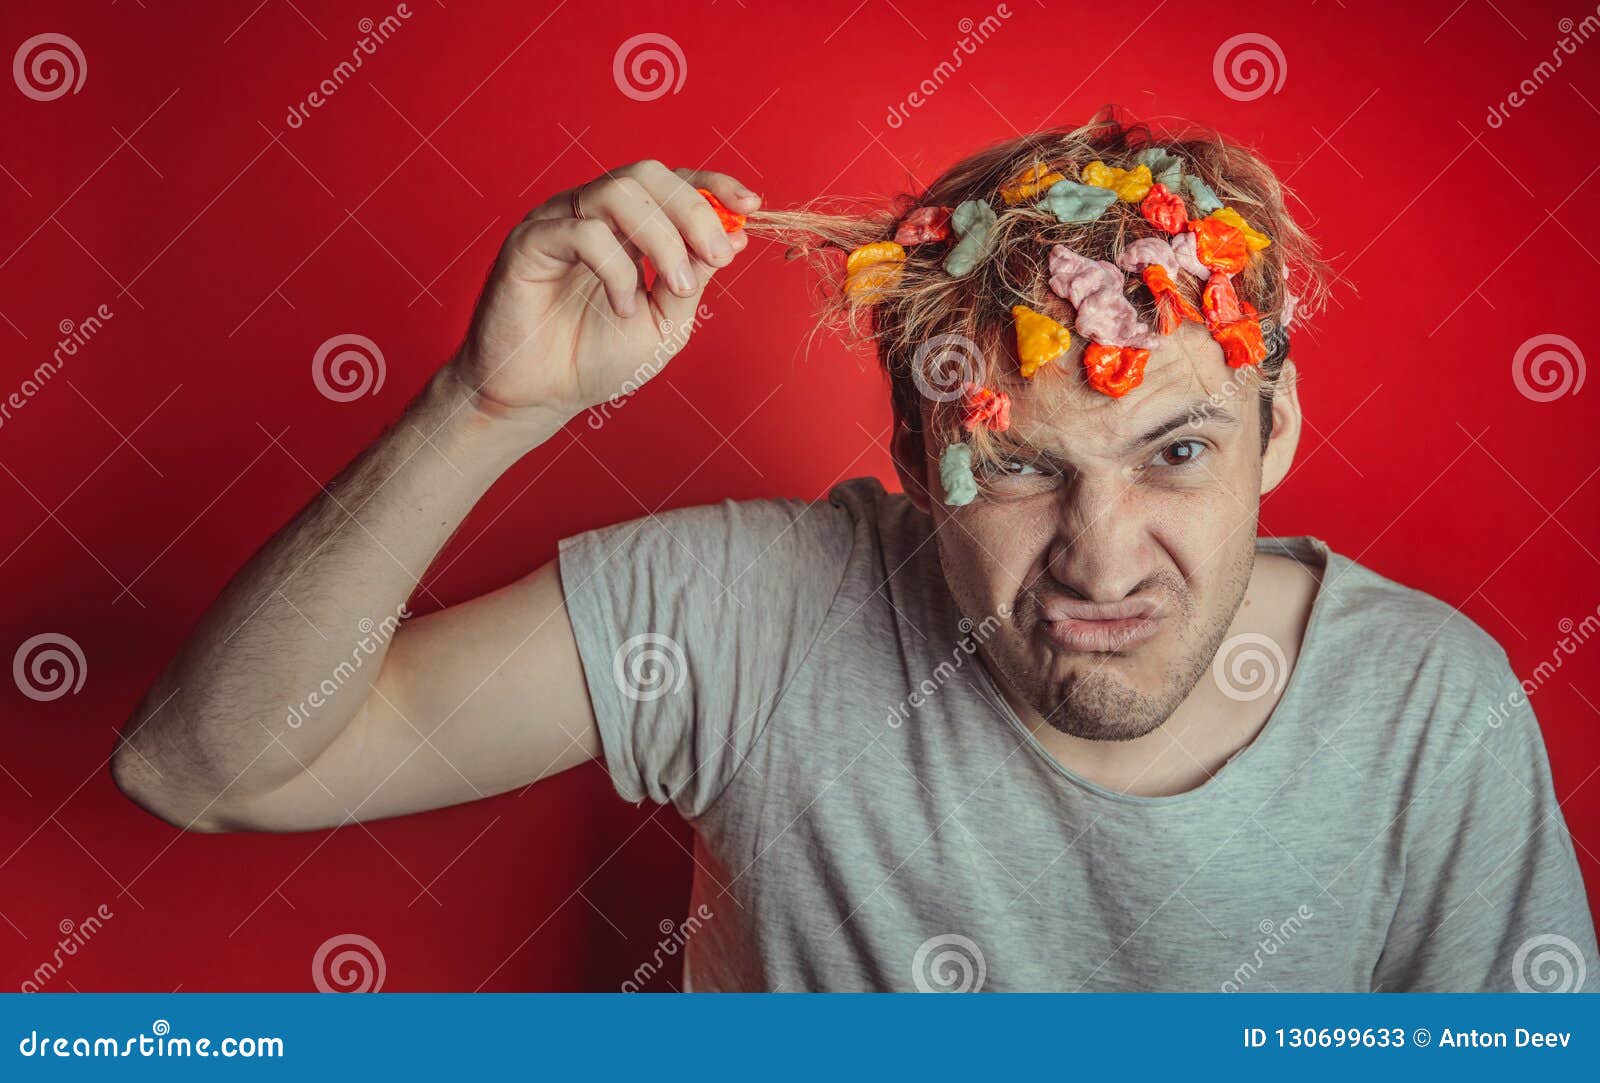 Gum in His Head. Portrait of Man with Chewing Gum in His Head. Man with Hair  Covered in Food Stock Image - Image of accident, food: 130699633